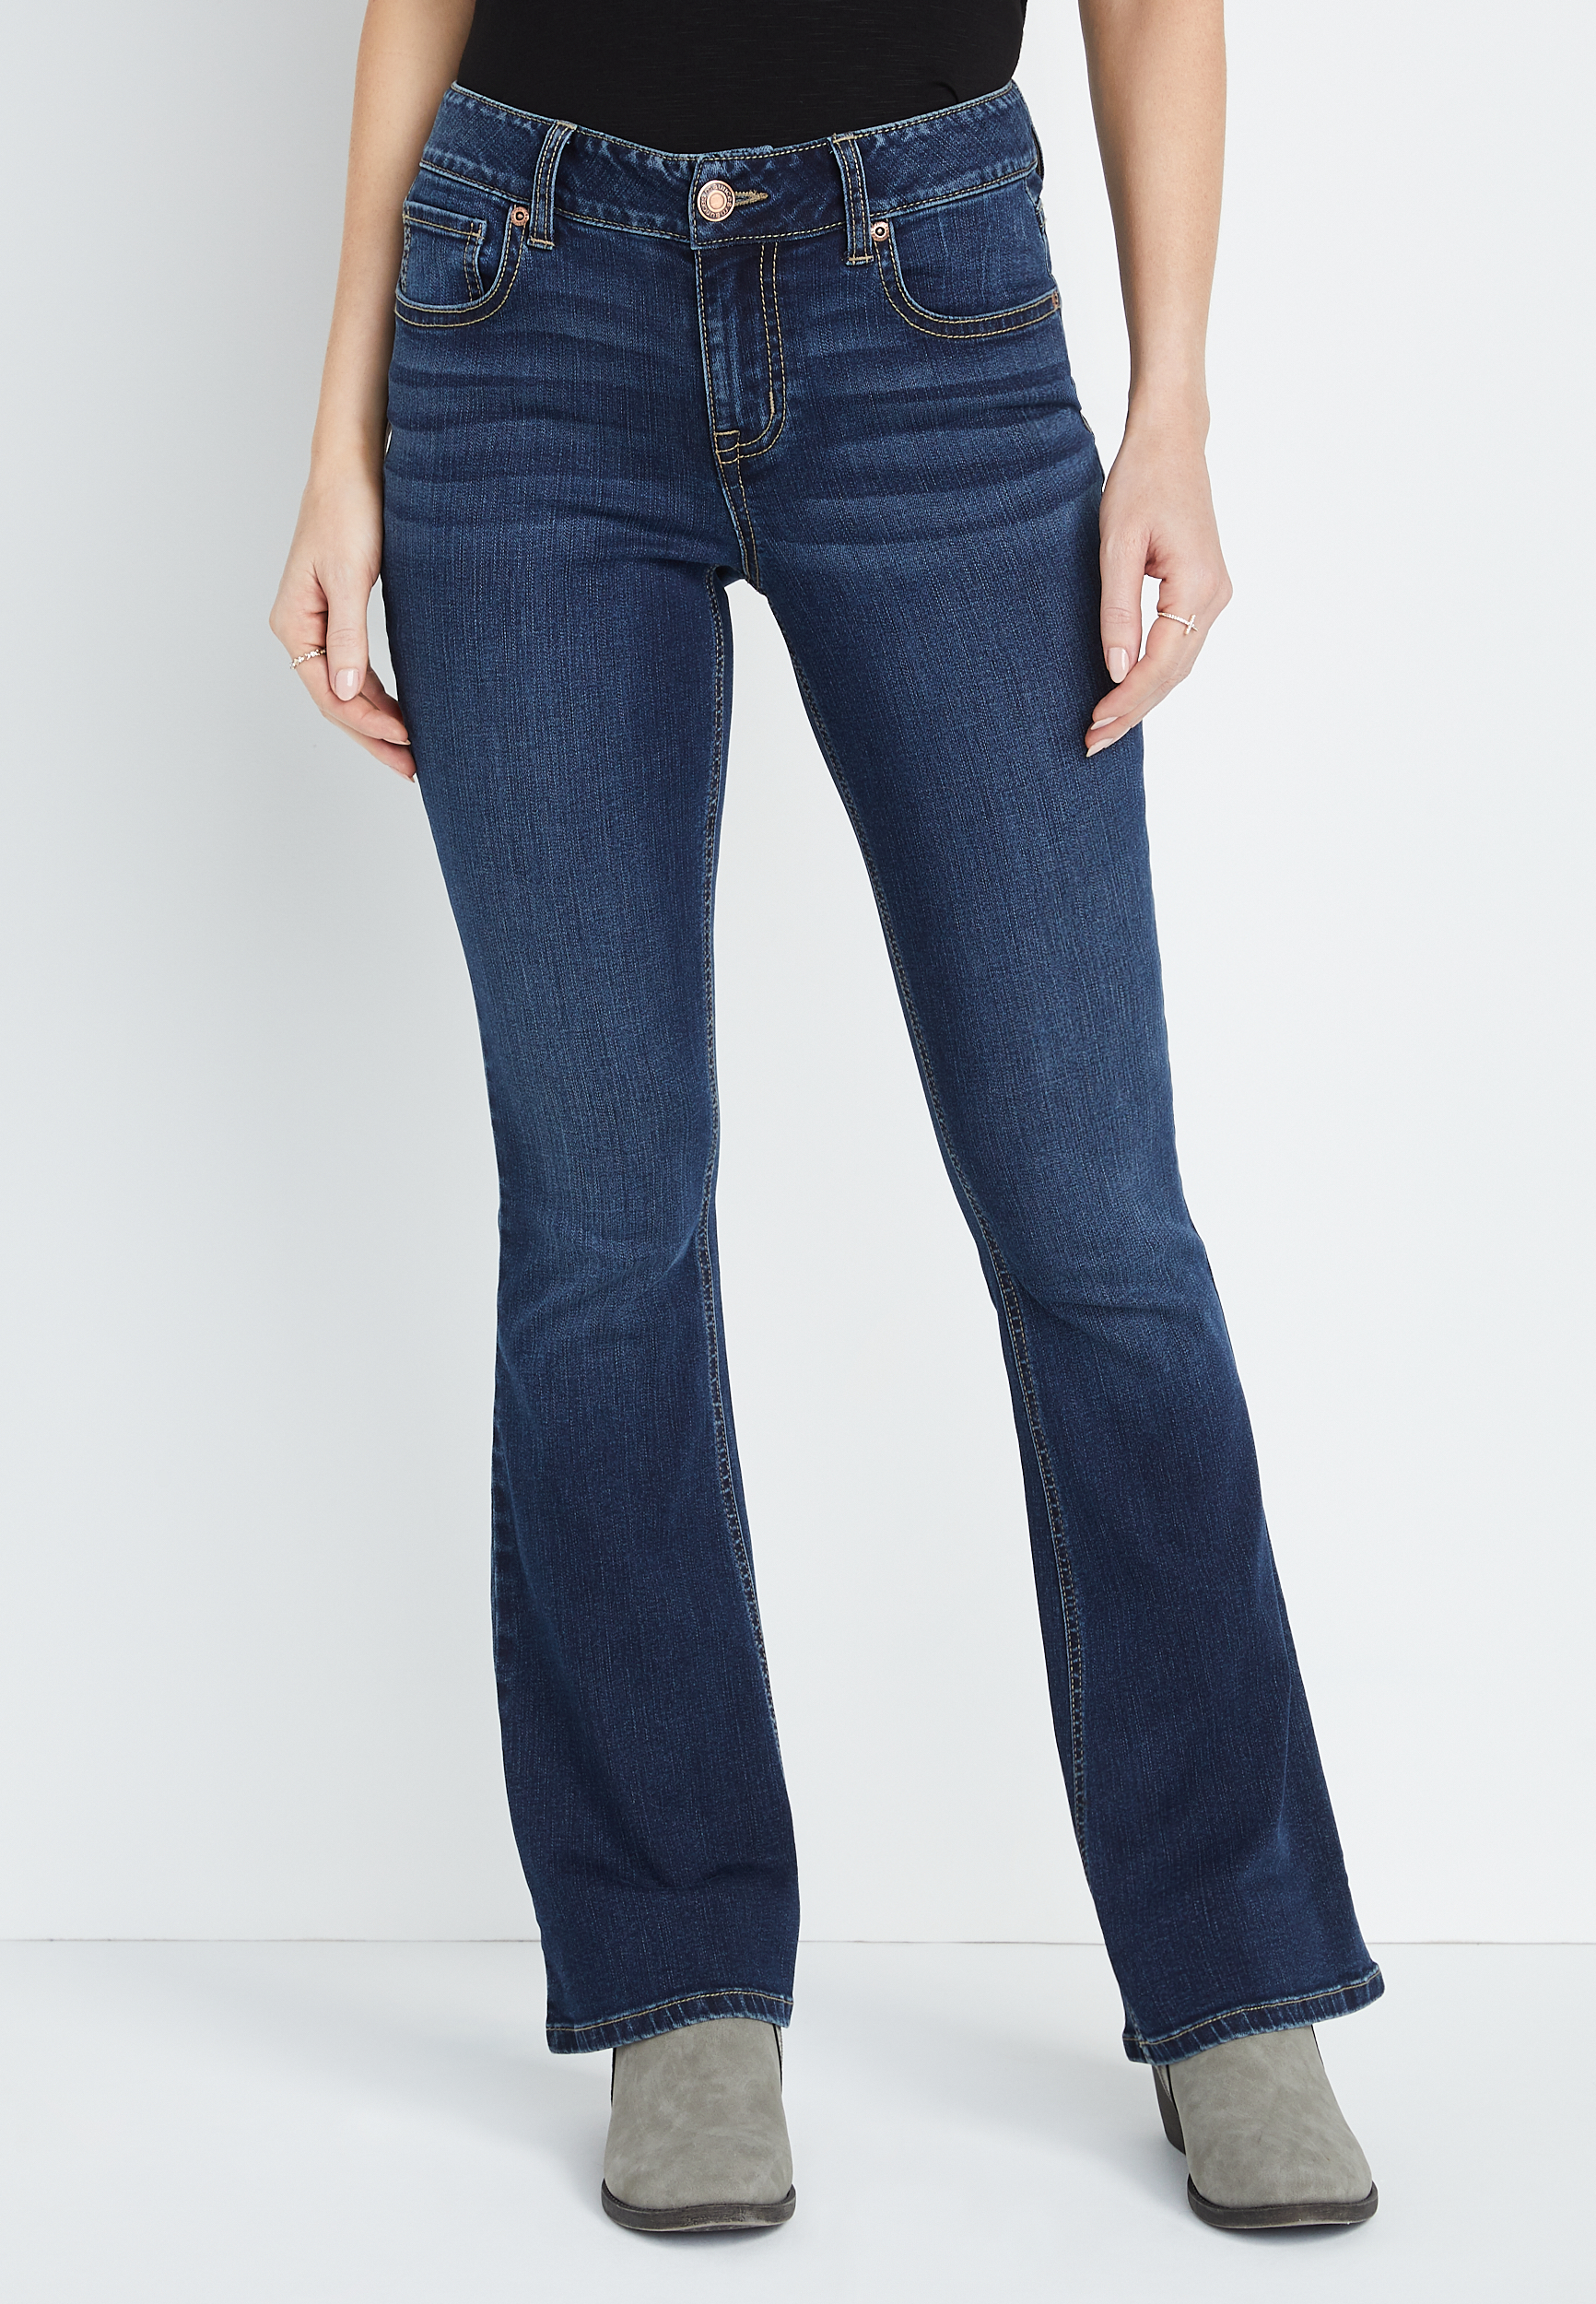 m jeans by maurices™ Dark Wash Flare 